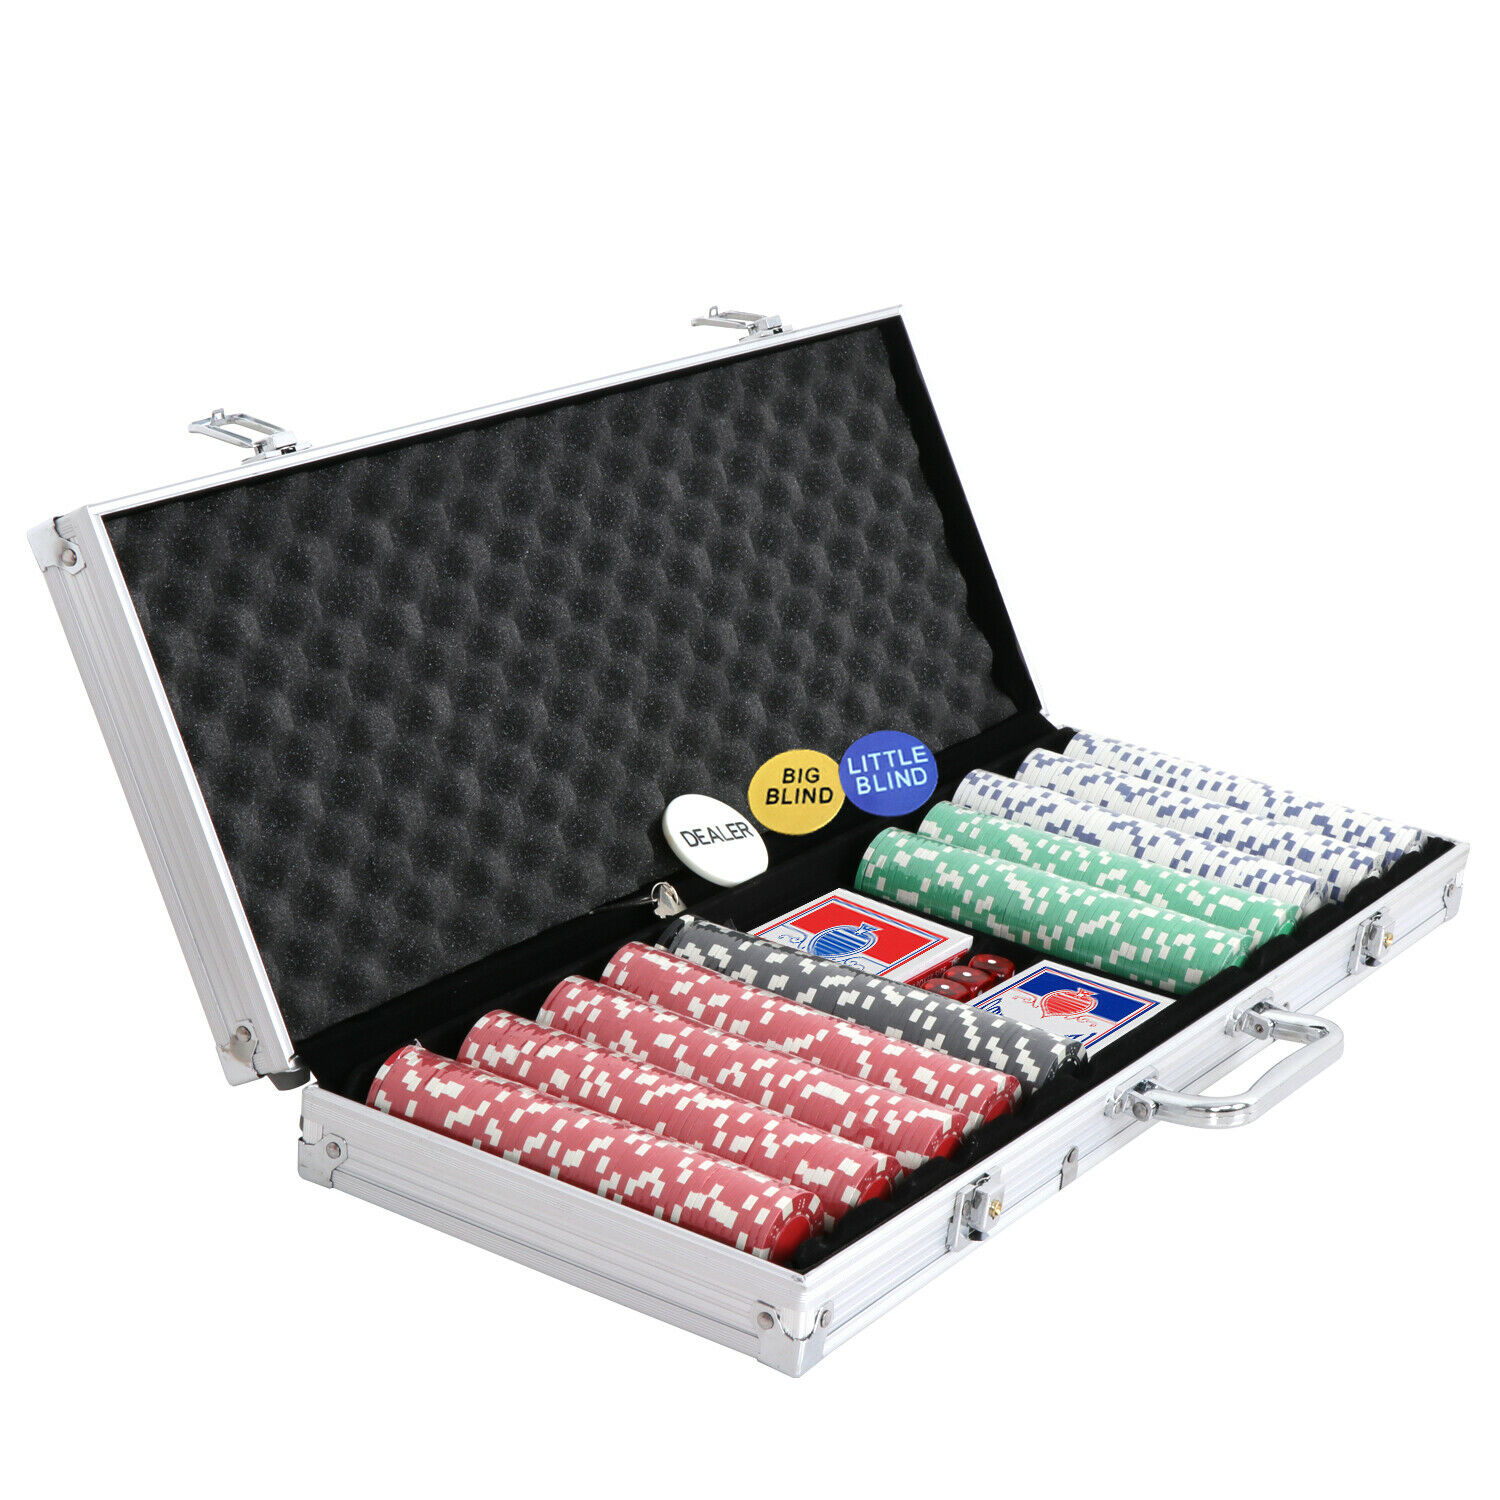 500 Chips Poker Chip Set 11.5 Gram Holdem Cards Game With Case & Dices At Home